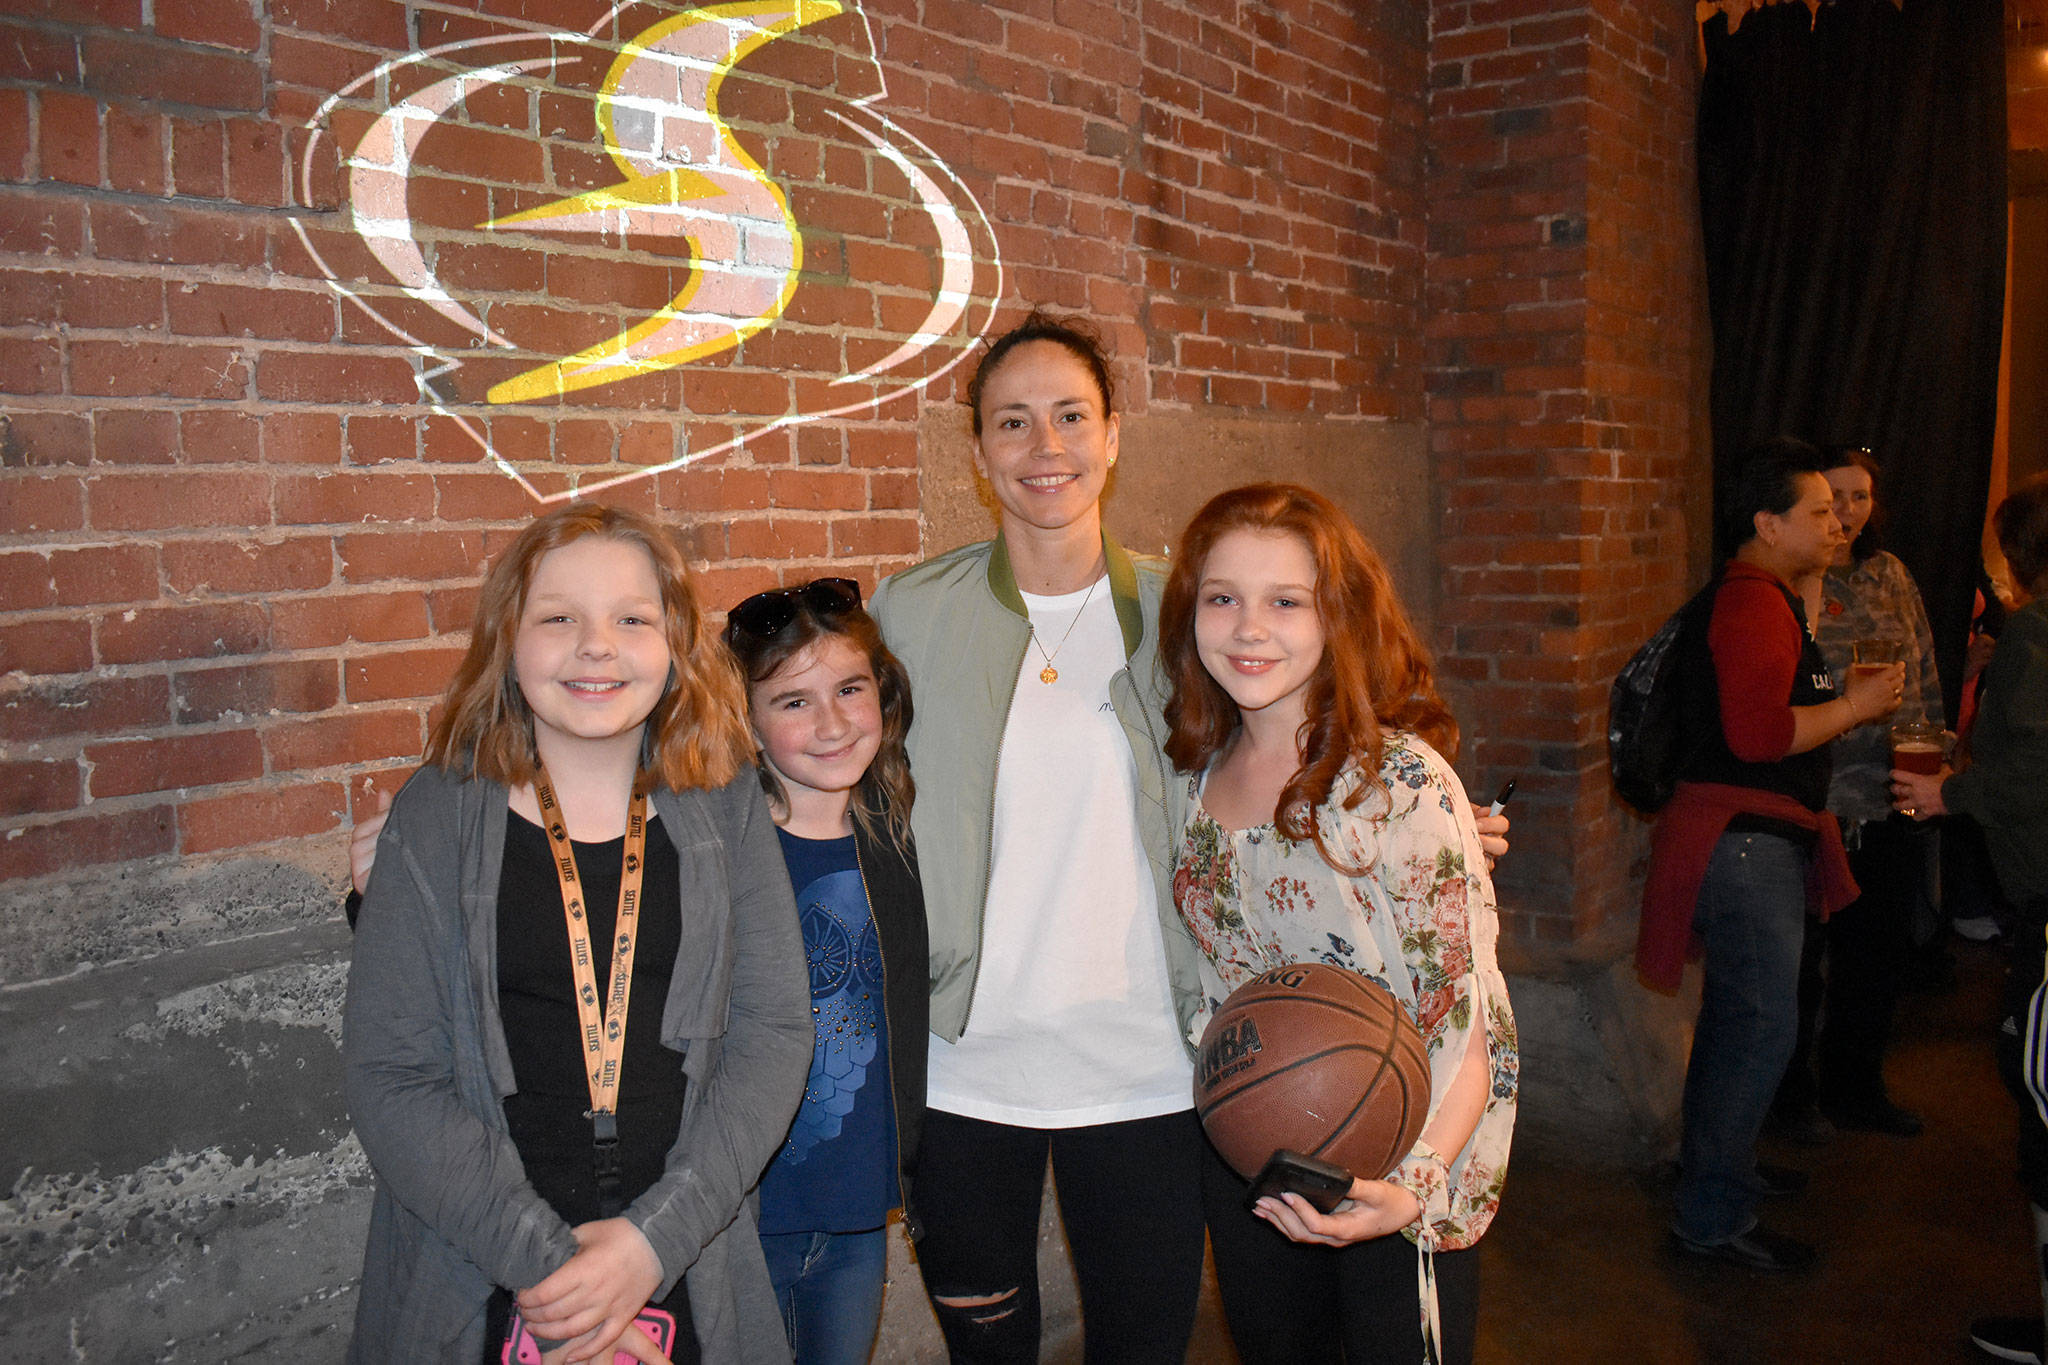 In photo at left, Sequim’s Destinie Bernard, left, and sisters Pearl and Lily Peterson stand with Seattle Storm guard Sue Bird for a photo on June 5 at a VIP experience in Seattle. Photos courtesy of Dave Miller